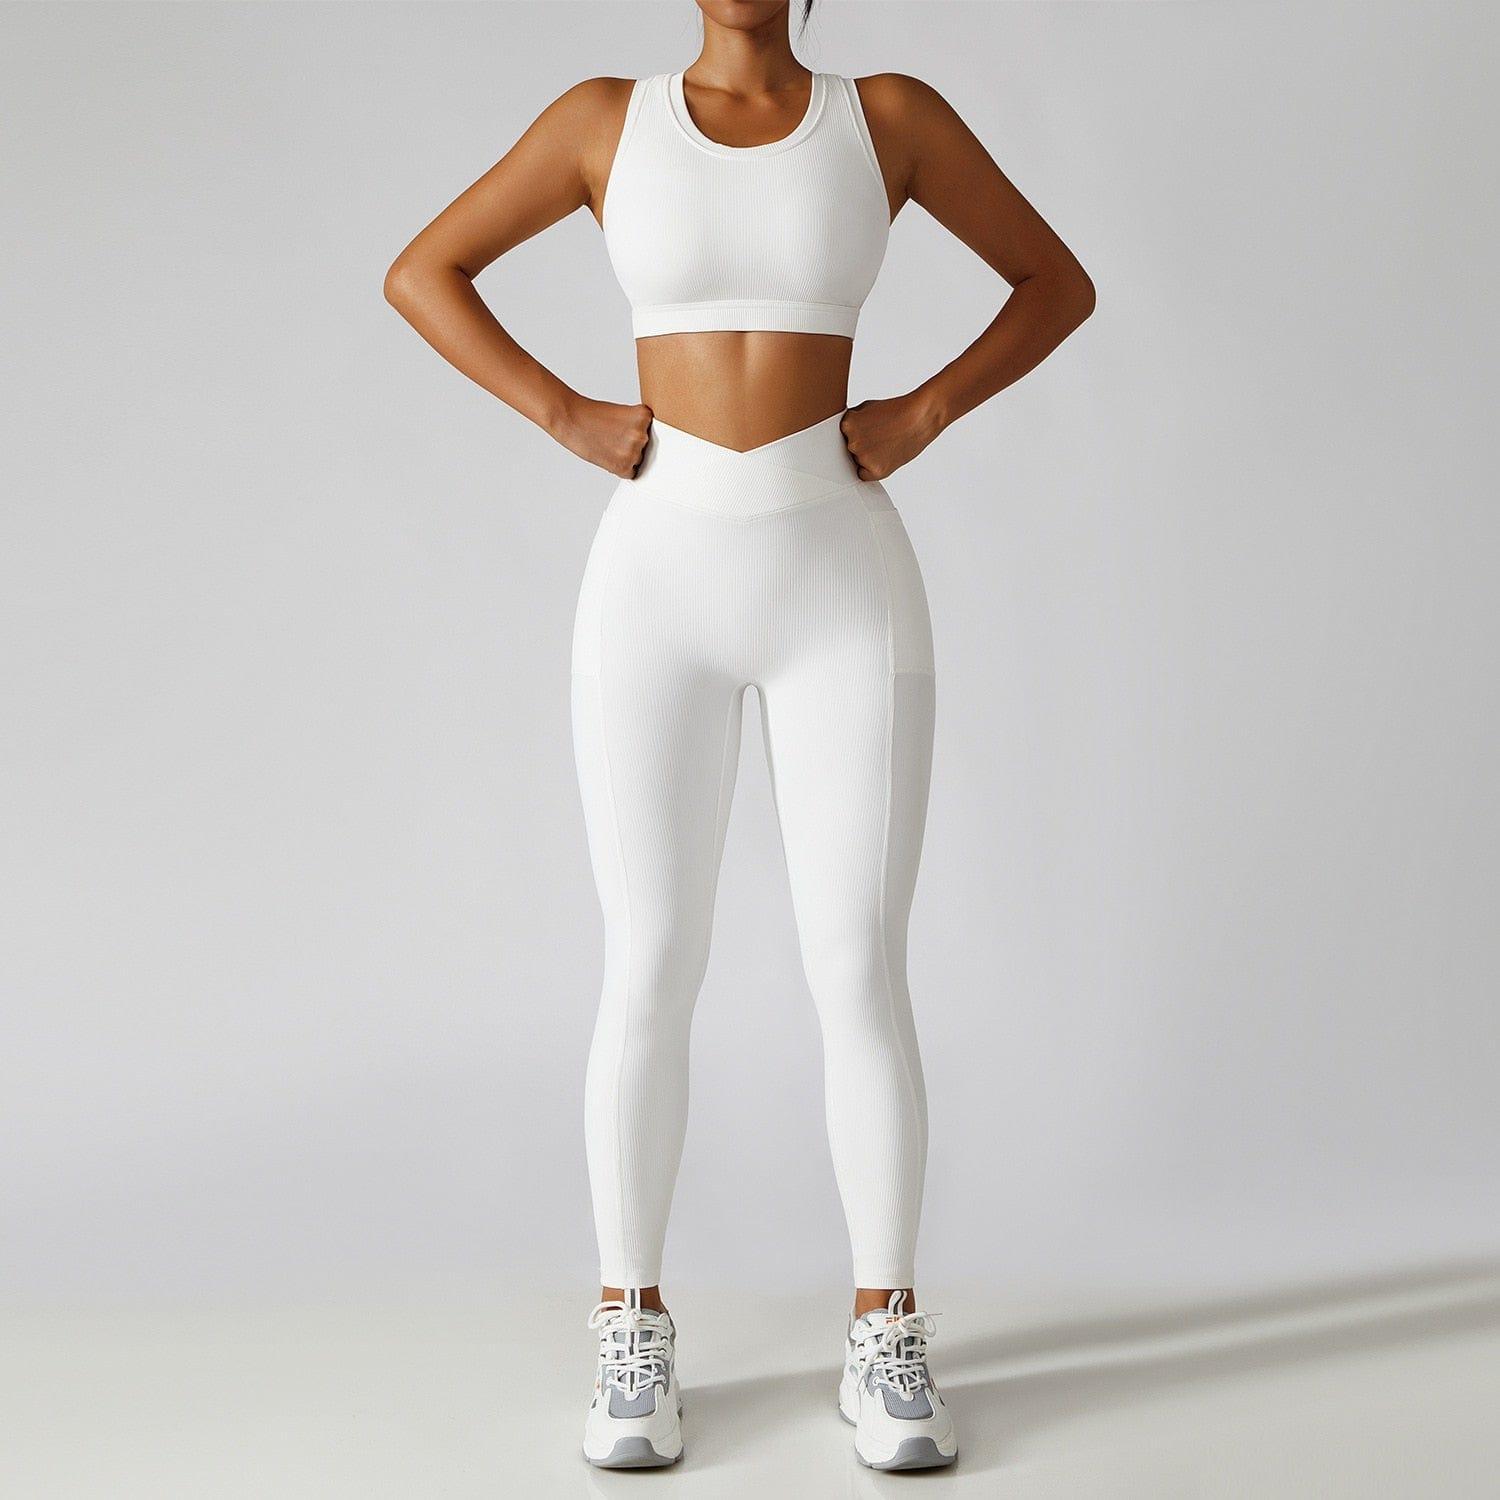 Shop 0 White suit-4 / S / China 2 Pieces Seamless Women Tracksuit  Yoga Set Running Workout Sportswear Gym Clothes Fitness Bra High Waist Leggings Sports Suit Mademoiselle Home Decor